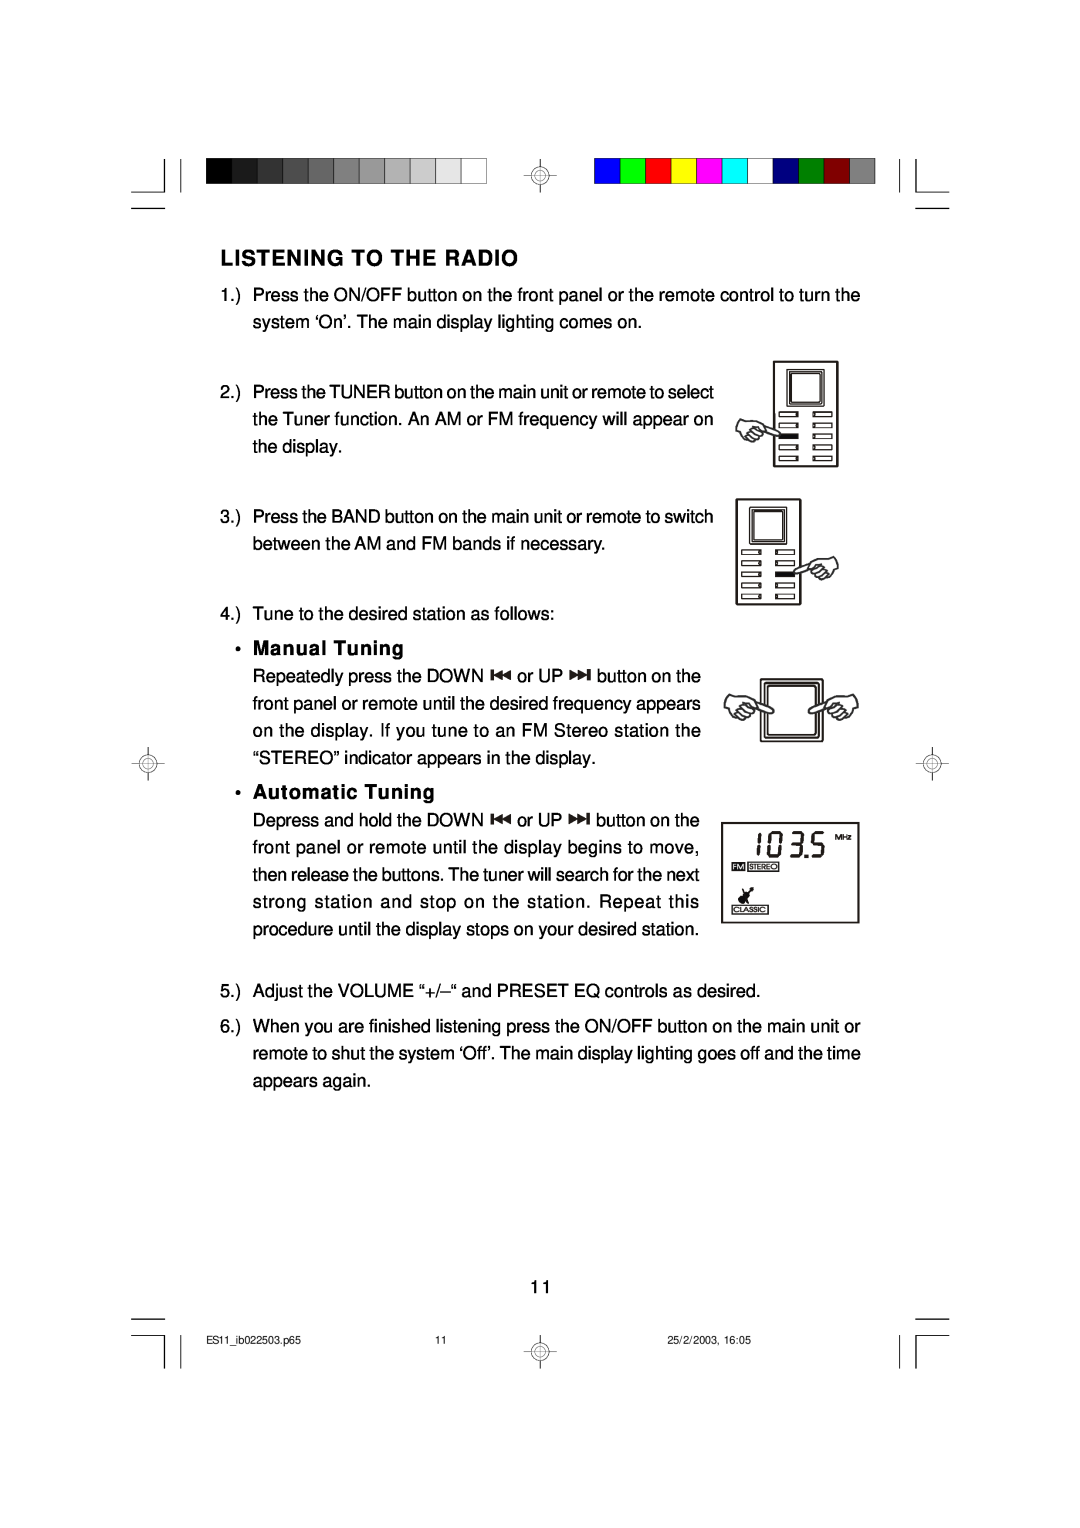 Emerson ES11 owner manual Listening To The Radio, Manual Tuning, Automatic Tuning 